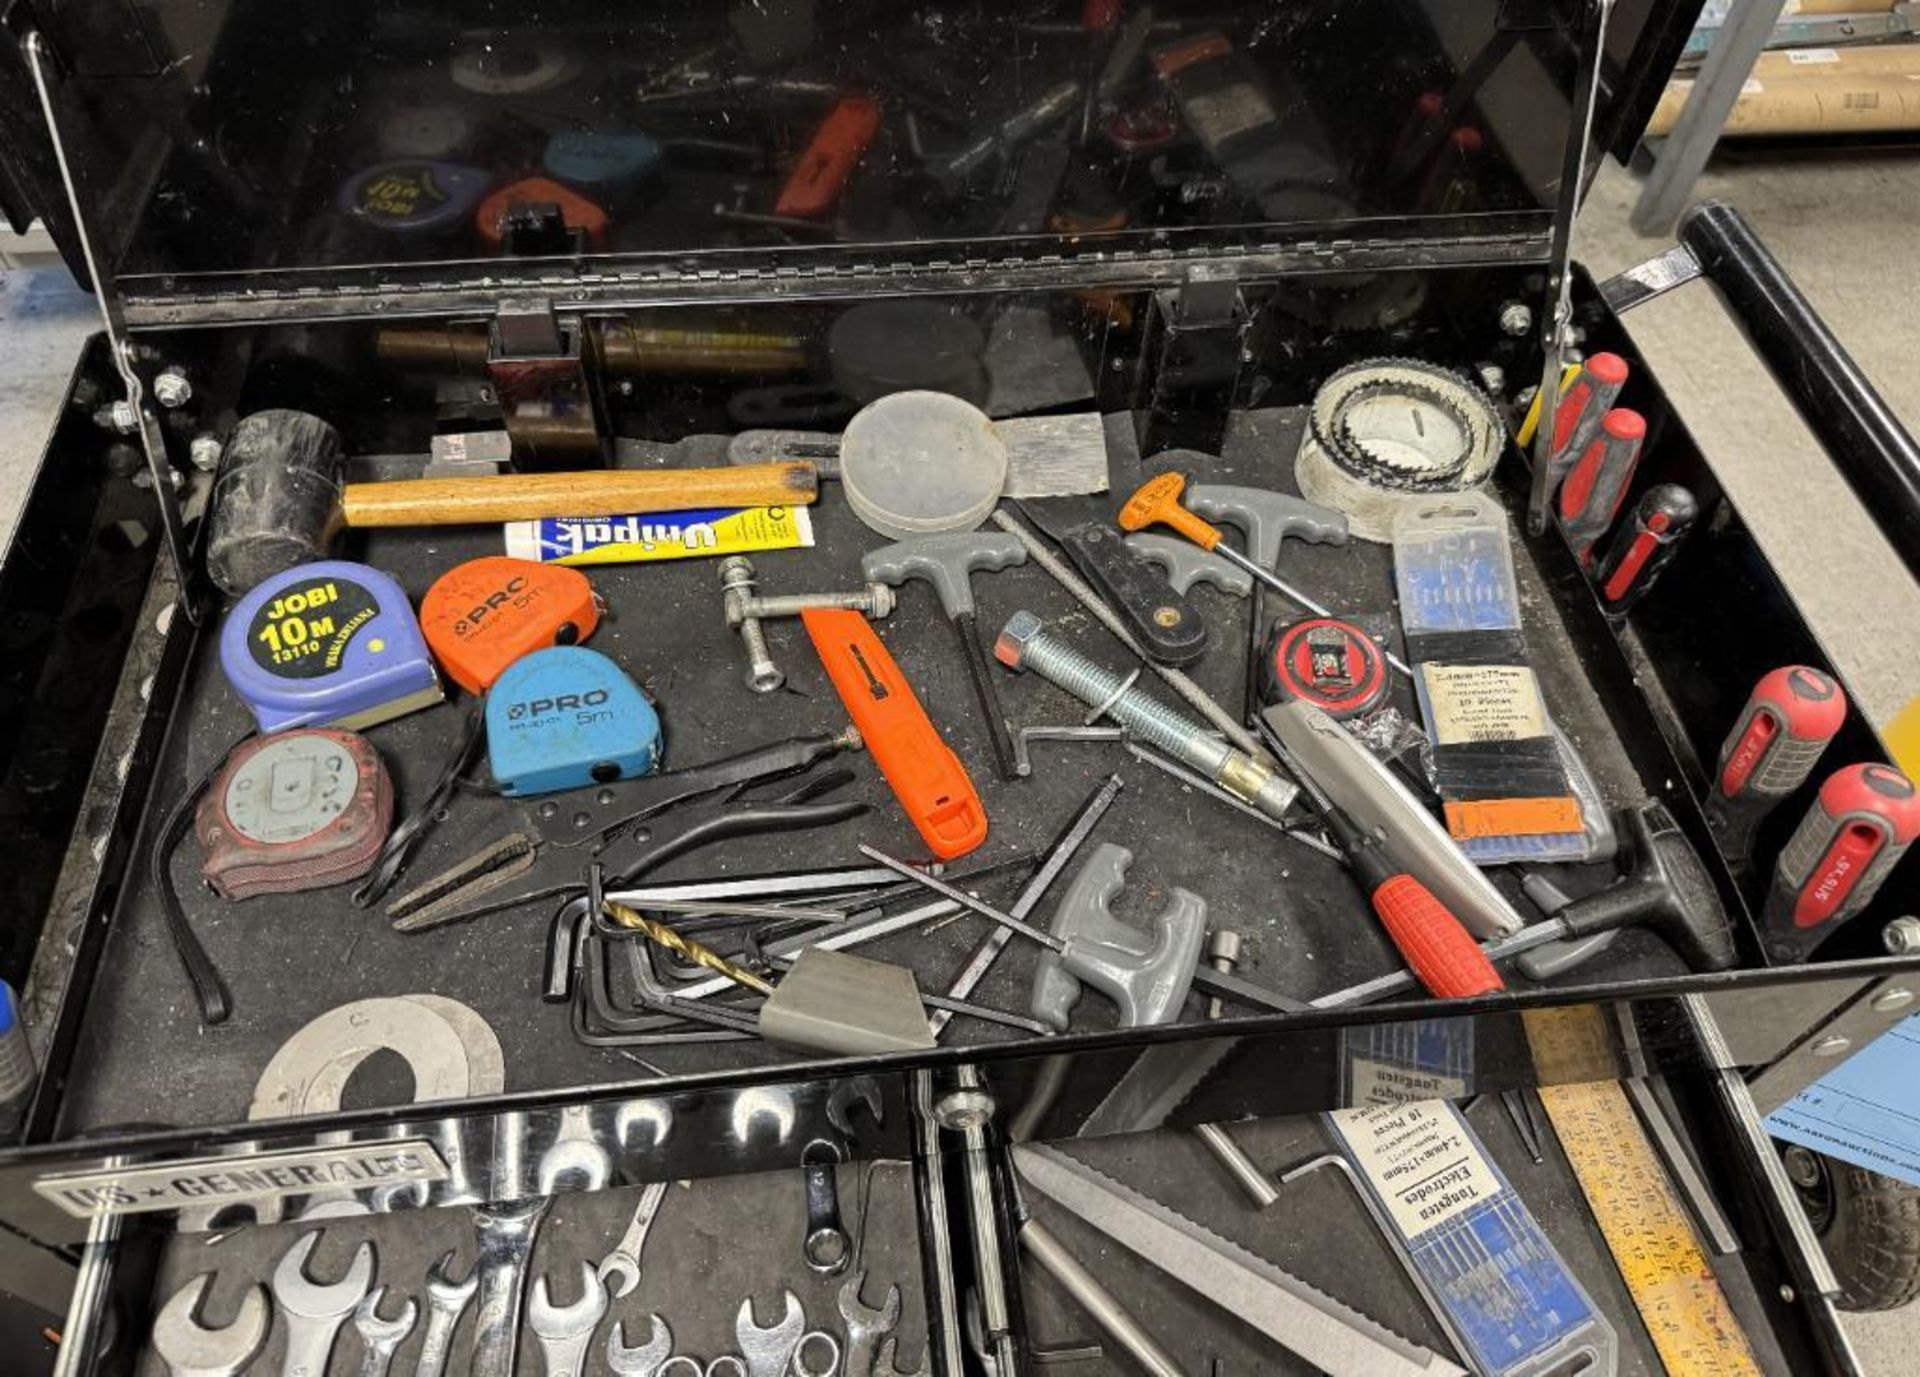 Lot Consisting Of: (2) US General rolling tool boxes. With (4) heat guns and misc. tools. - Image 2 of 12